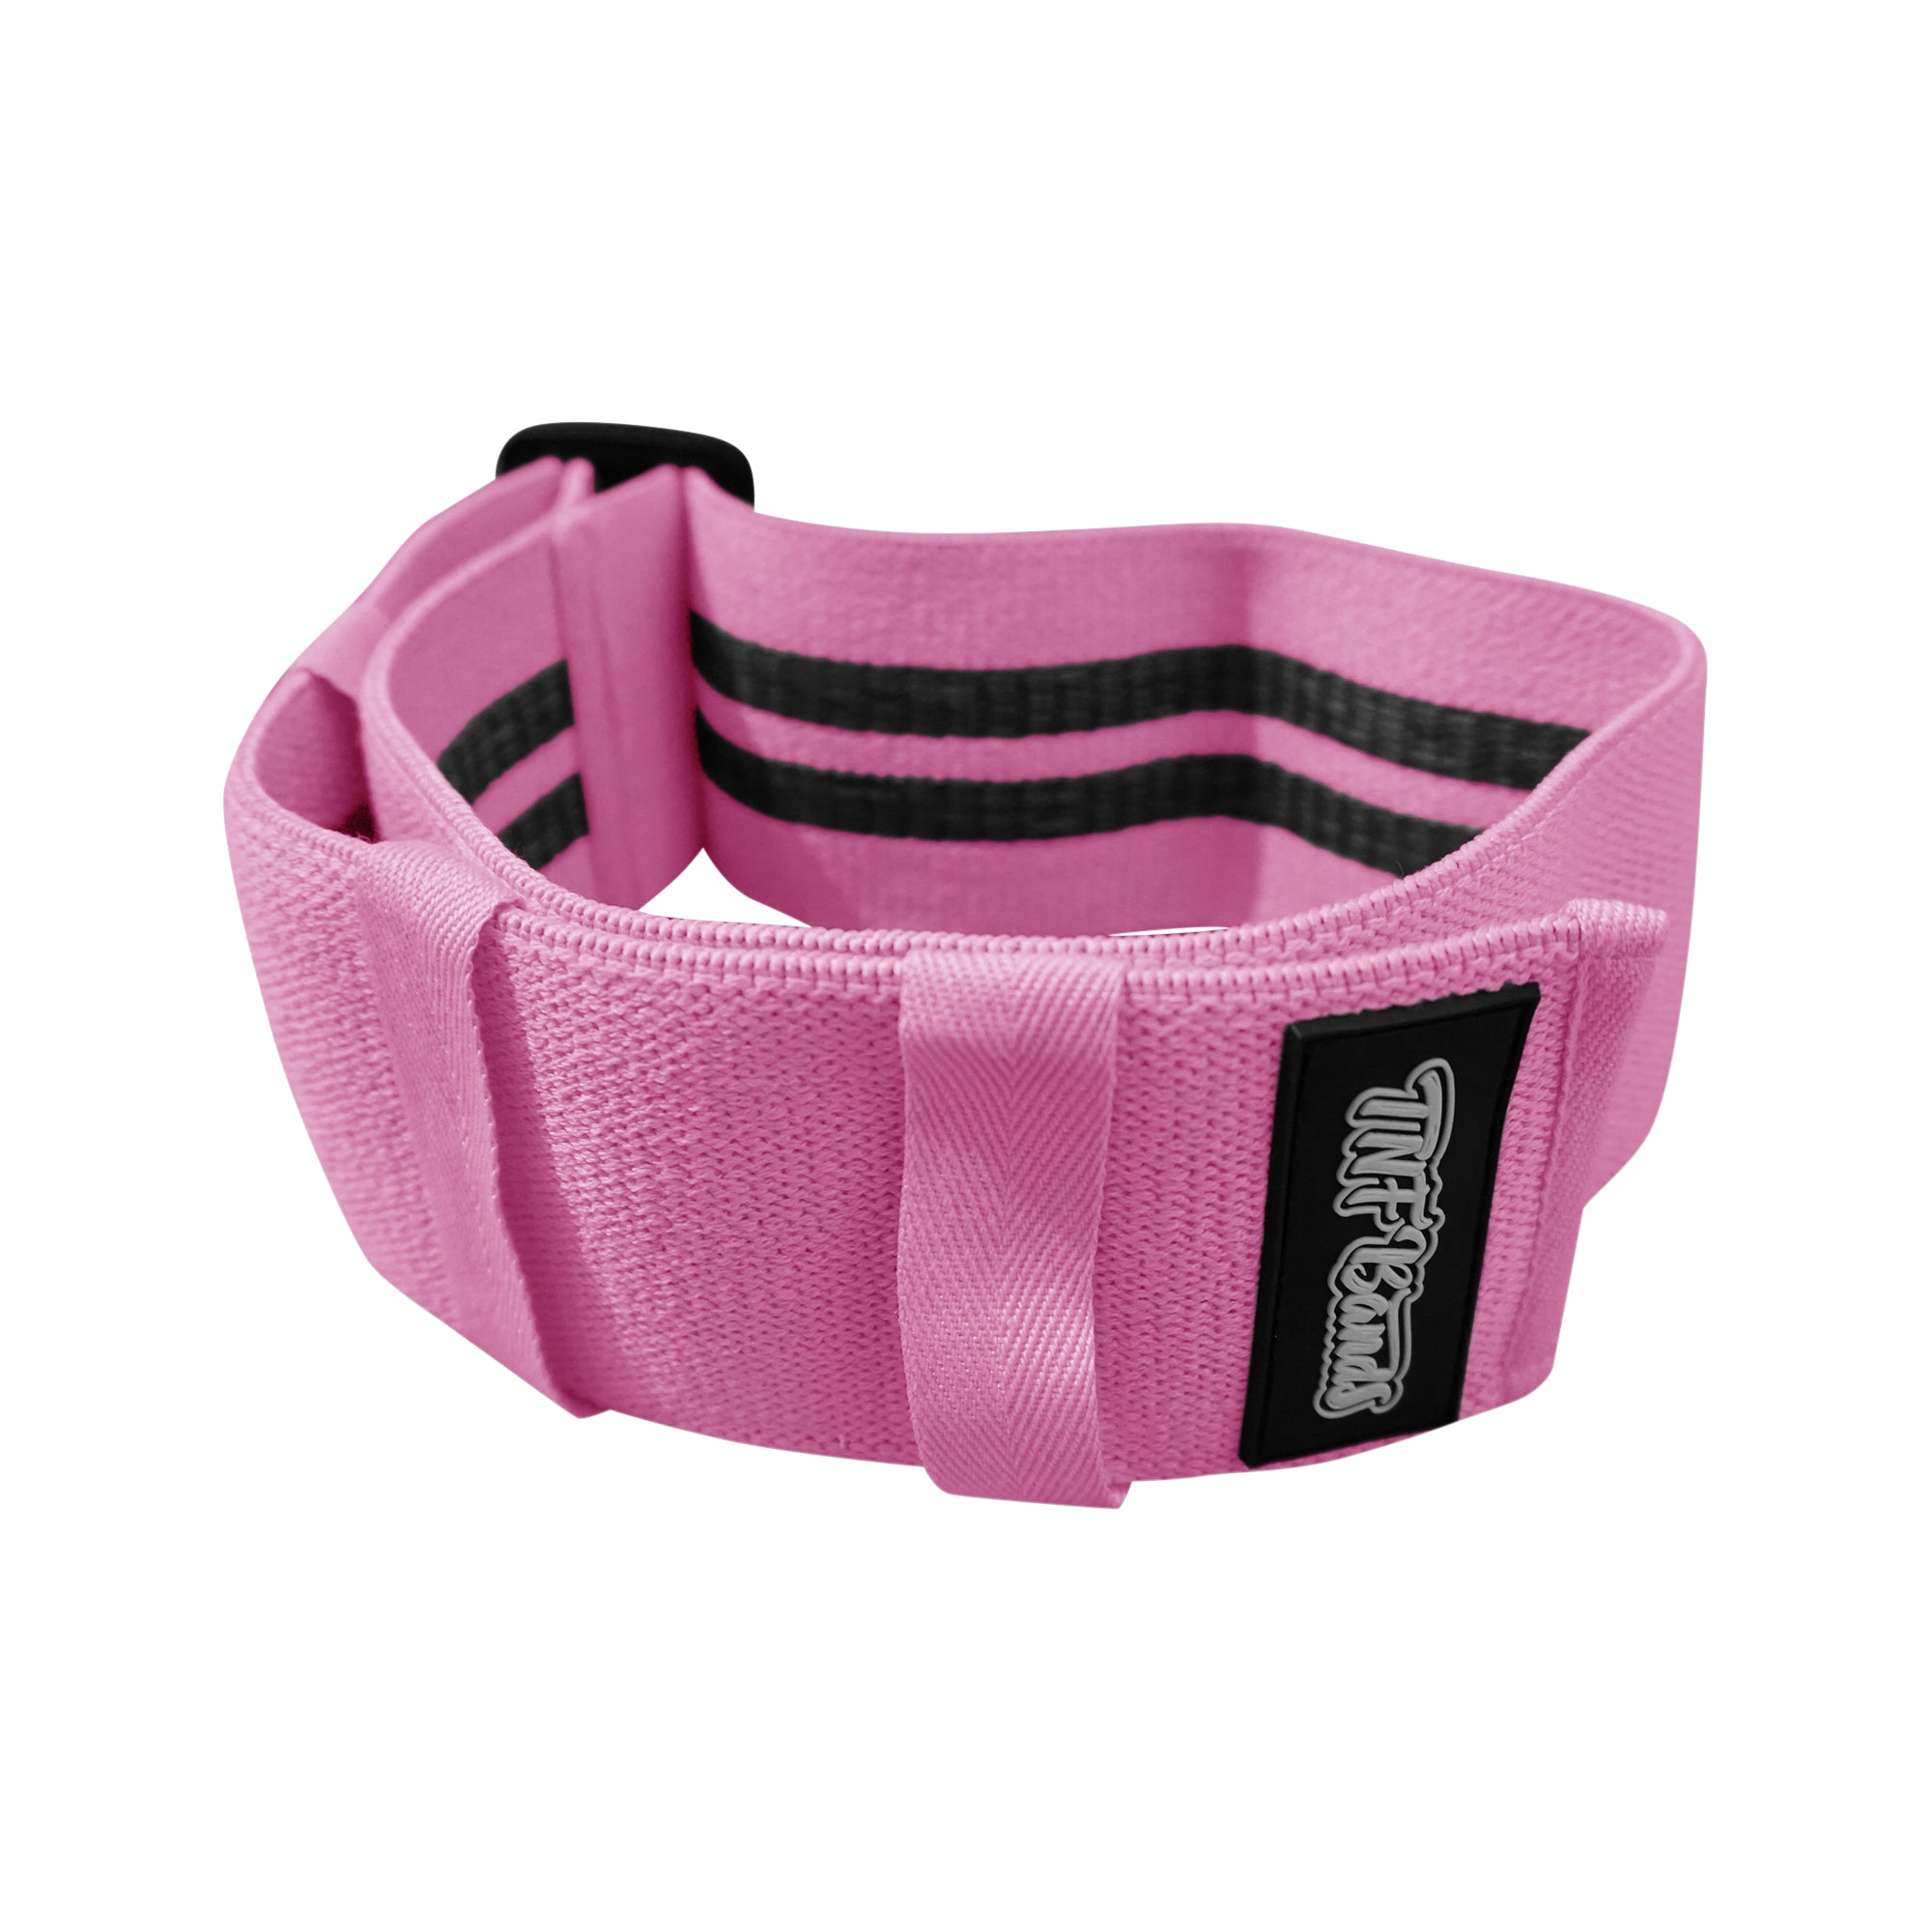 TNF Bands Adjustable Resistance Band (1 band) Fitness Accessories Black,Grey,Blue,Pink TNF Bands